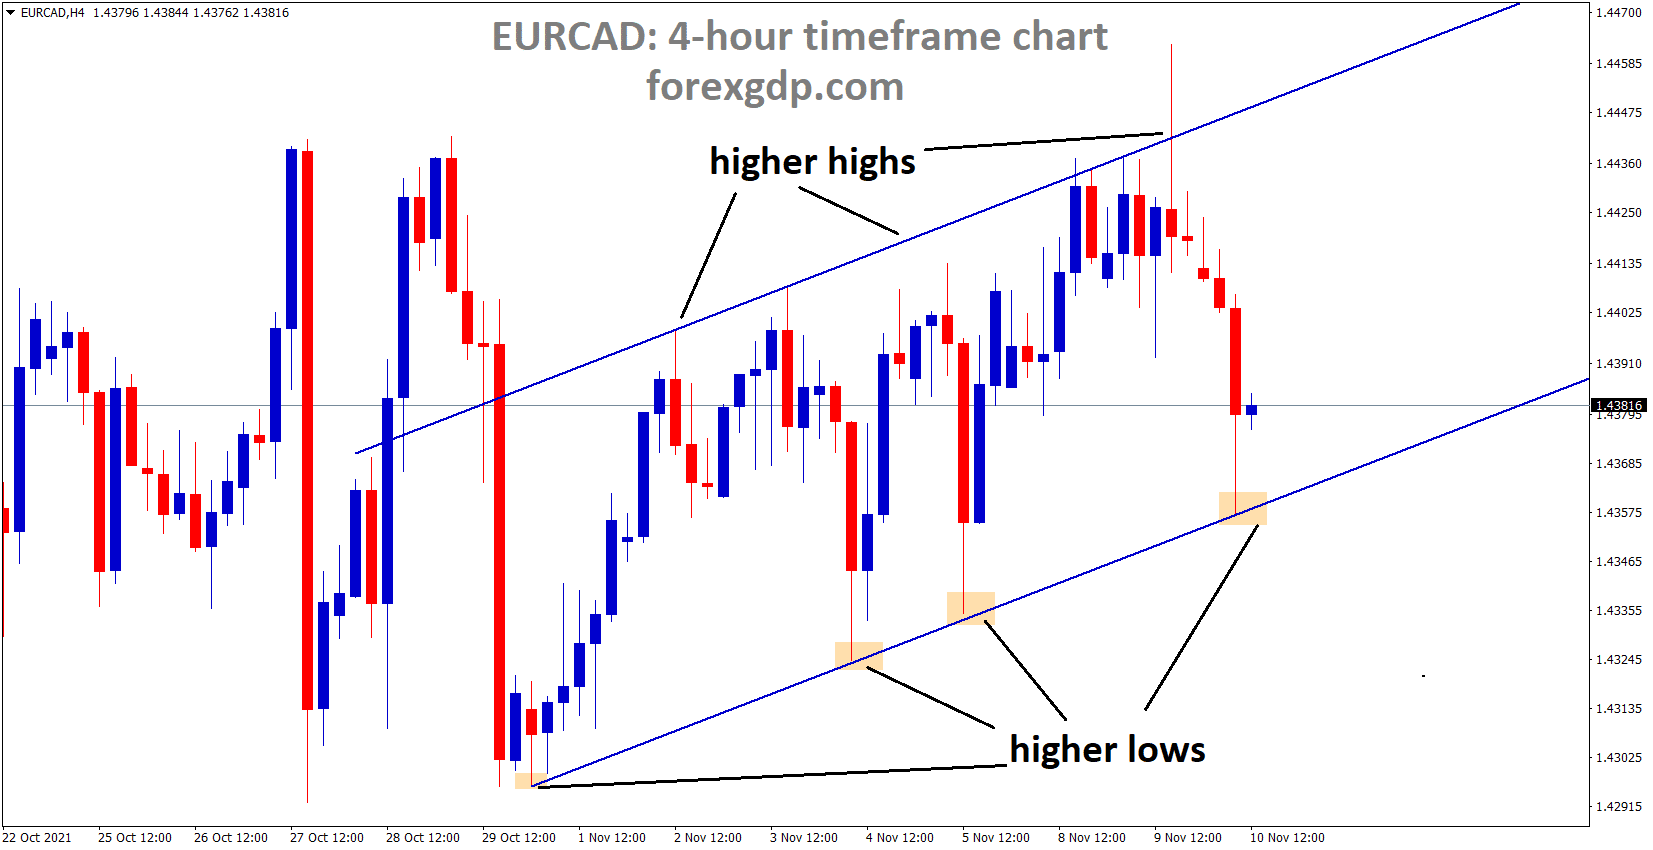 EURCAD is moving in an Ascending channel and the market is rebounding from the higher low area